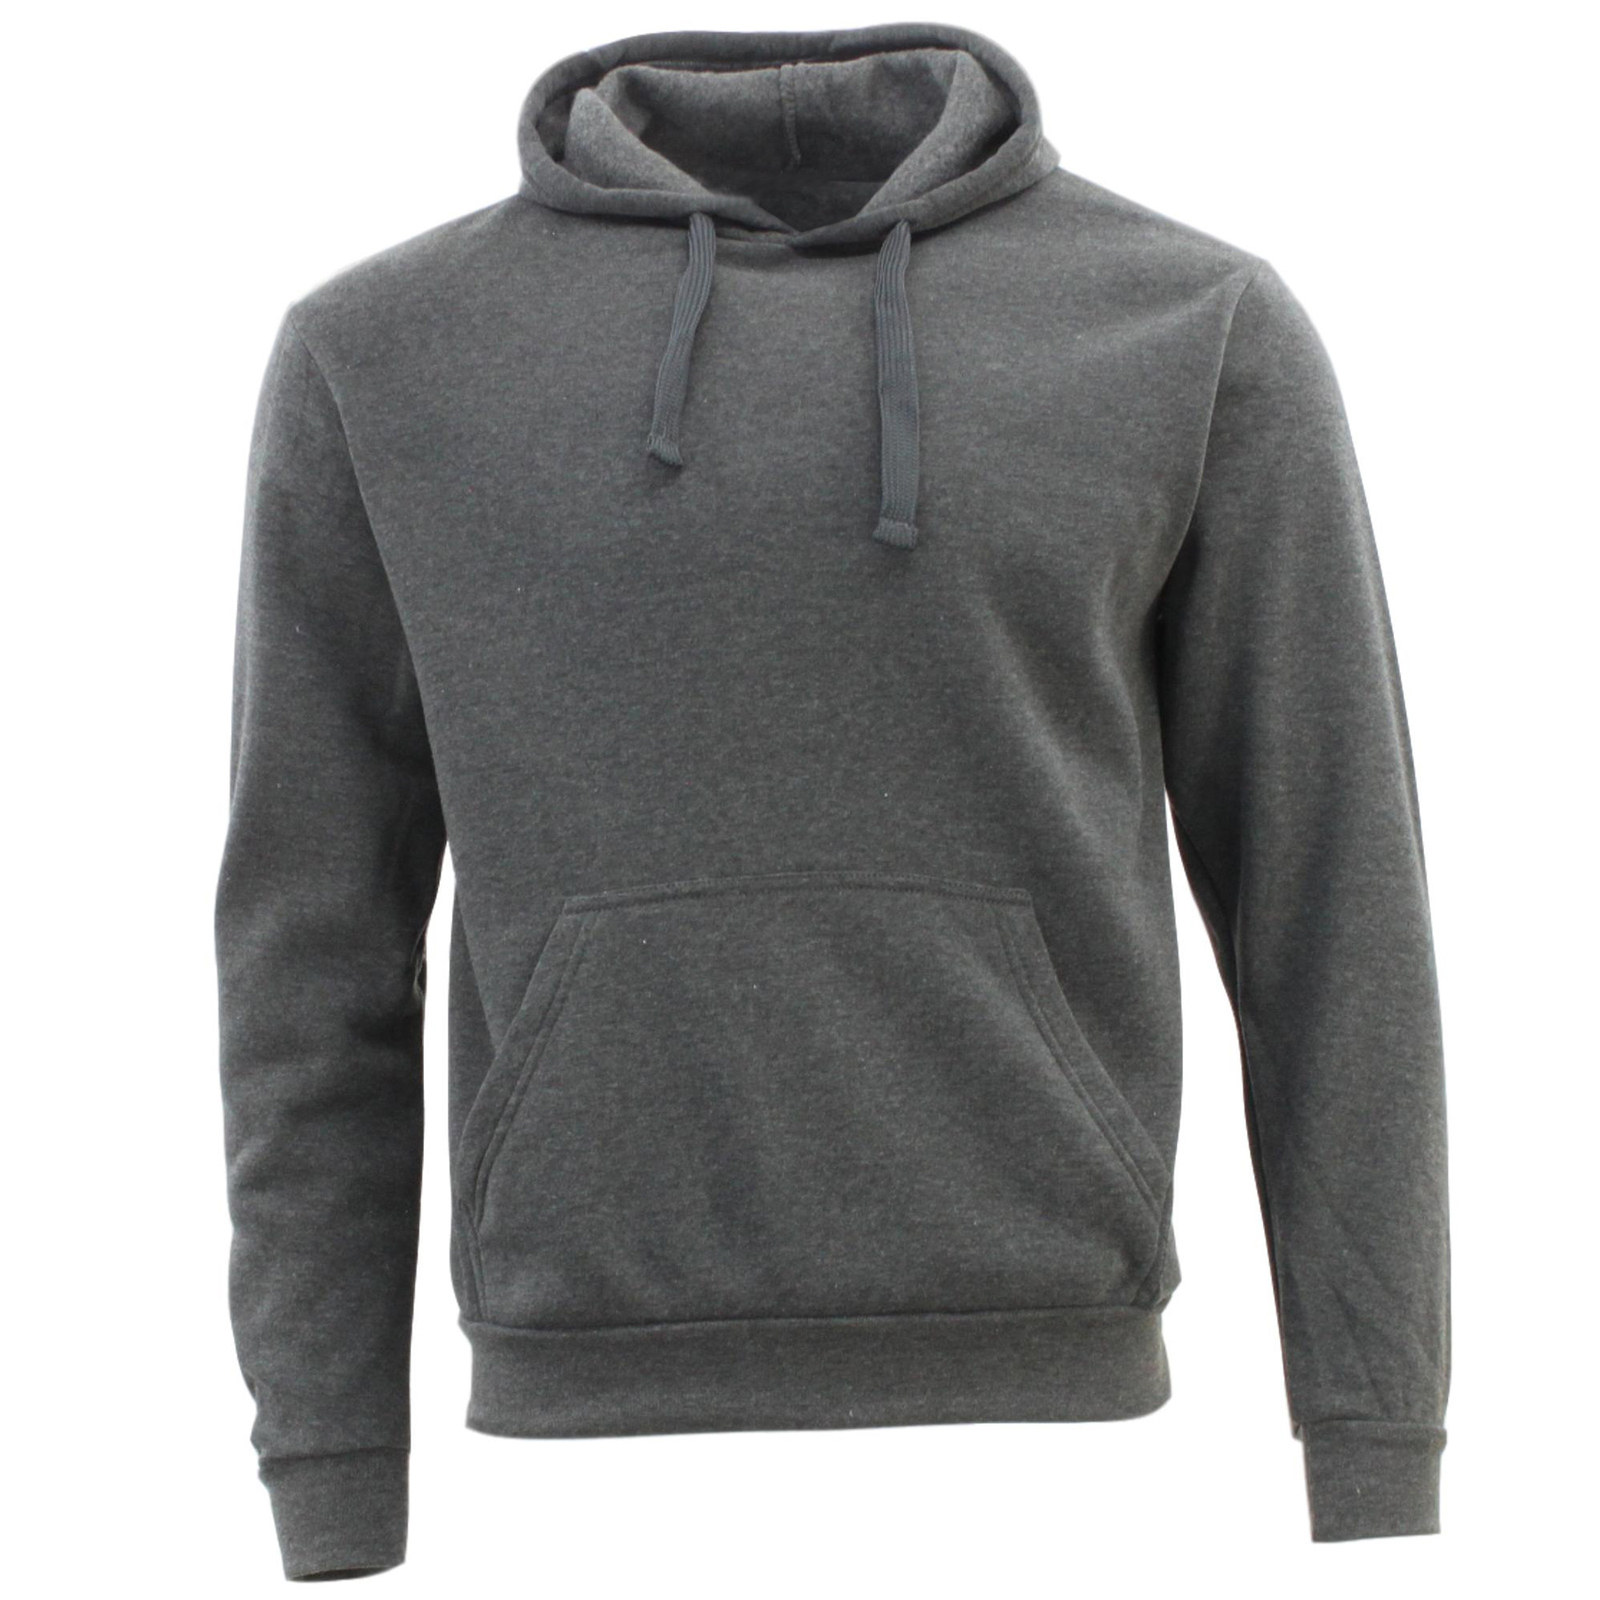 Tips On How To Select The Proper Hoodie Of All The Accessible Options